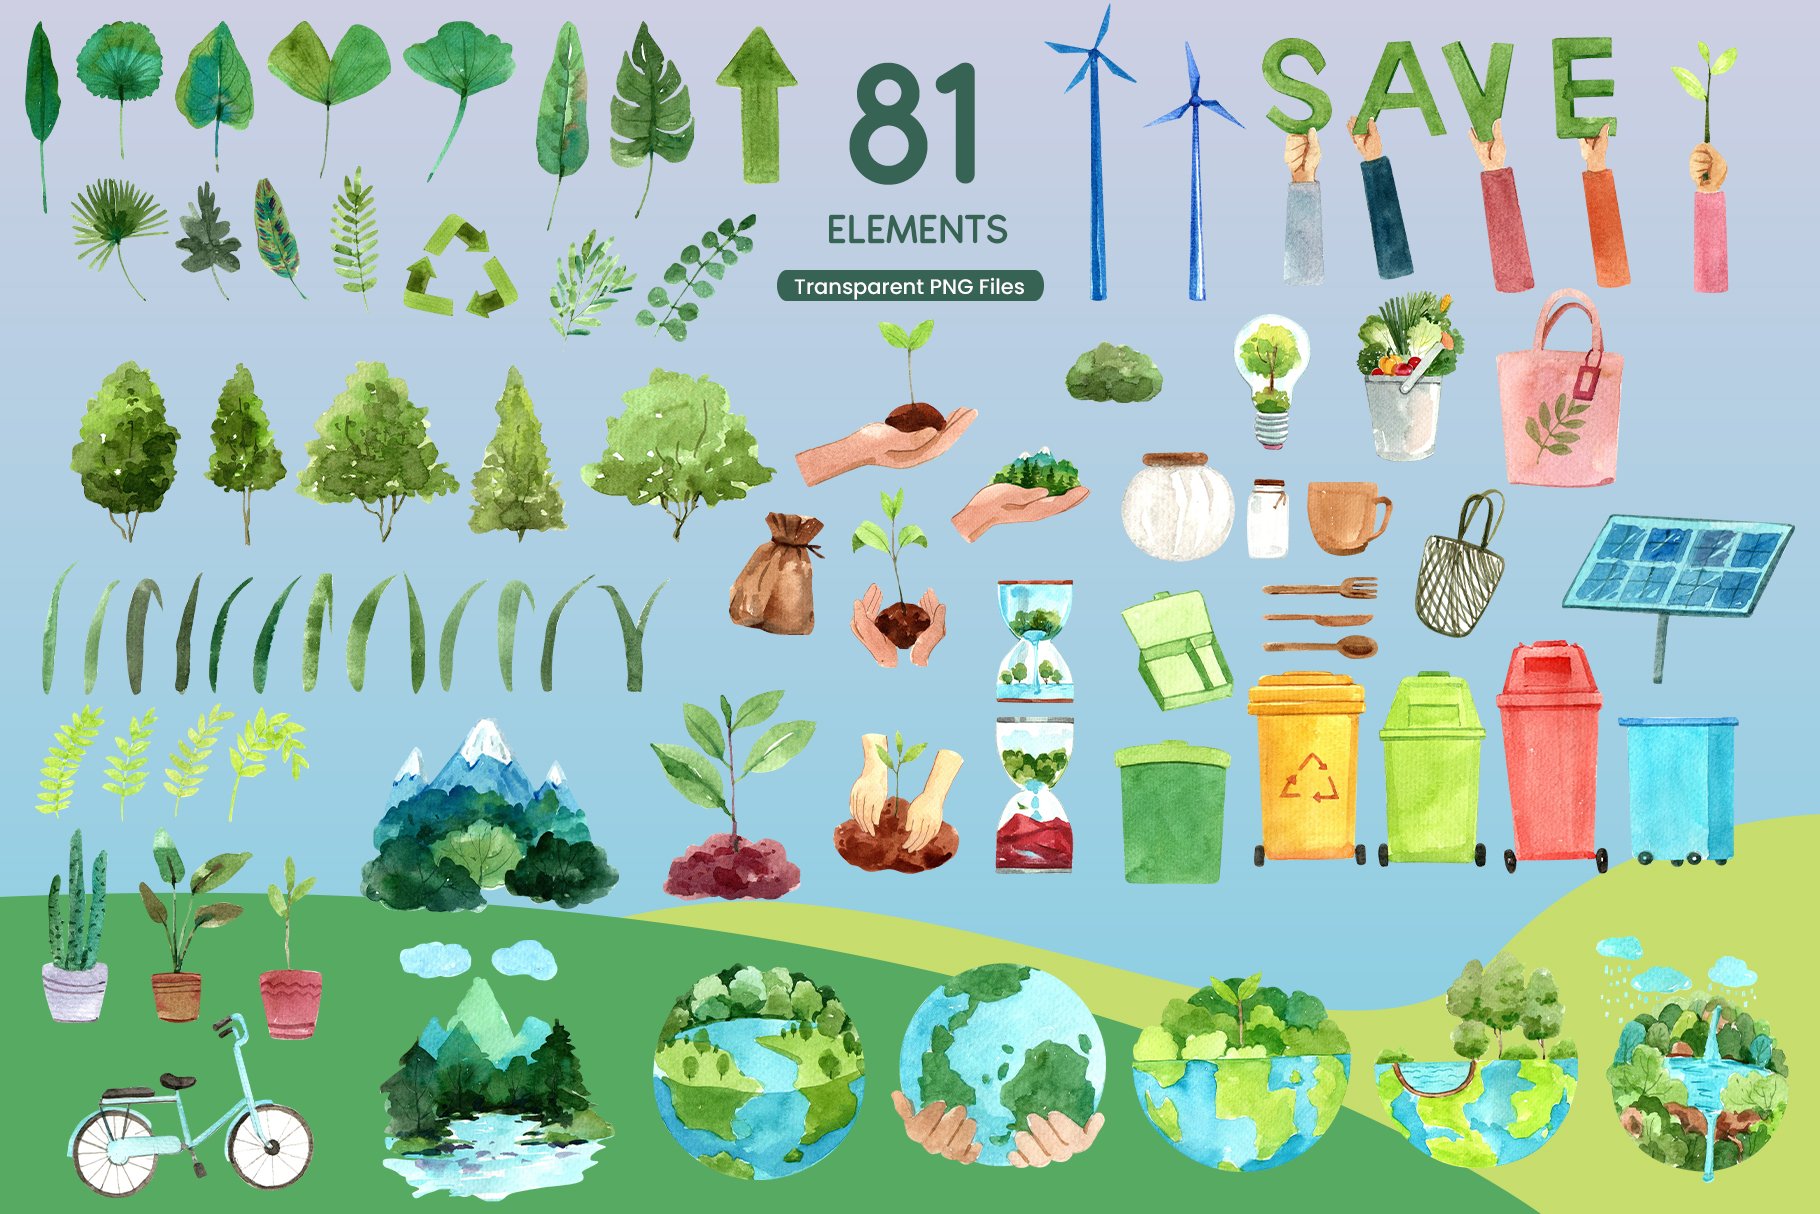 Some separate green elements to create a full save the Earth illustration.